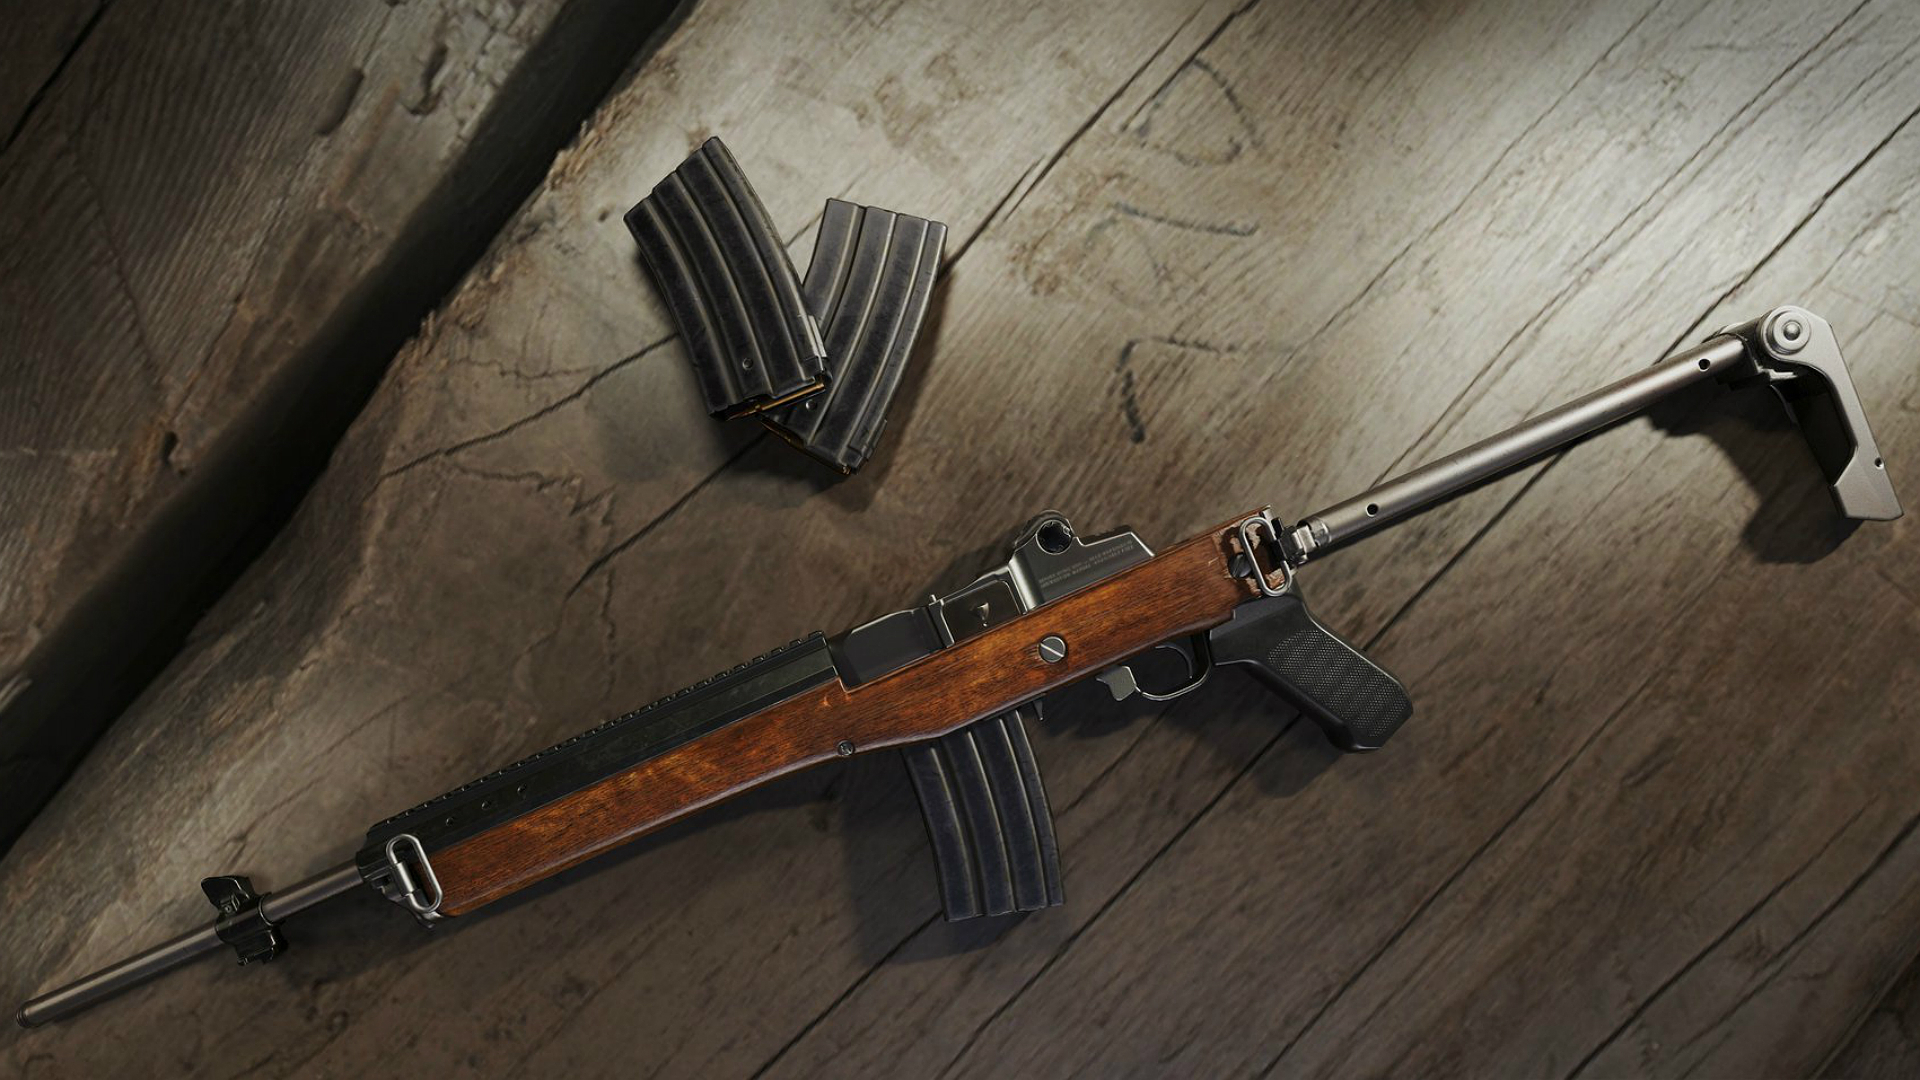 PUBG weapons guide: the best guns for getting a chicken dinner